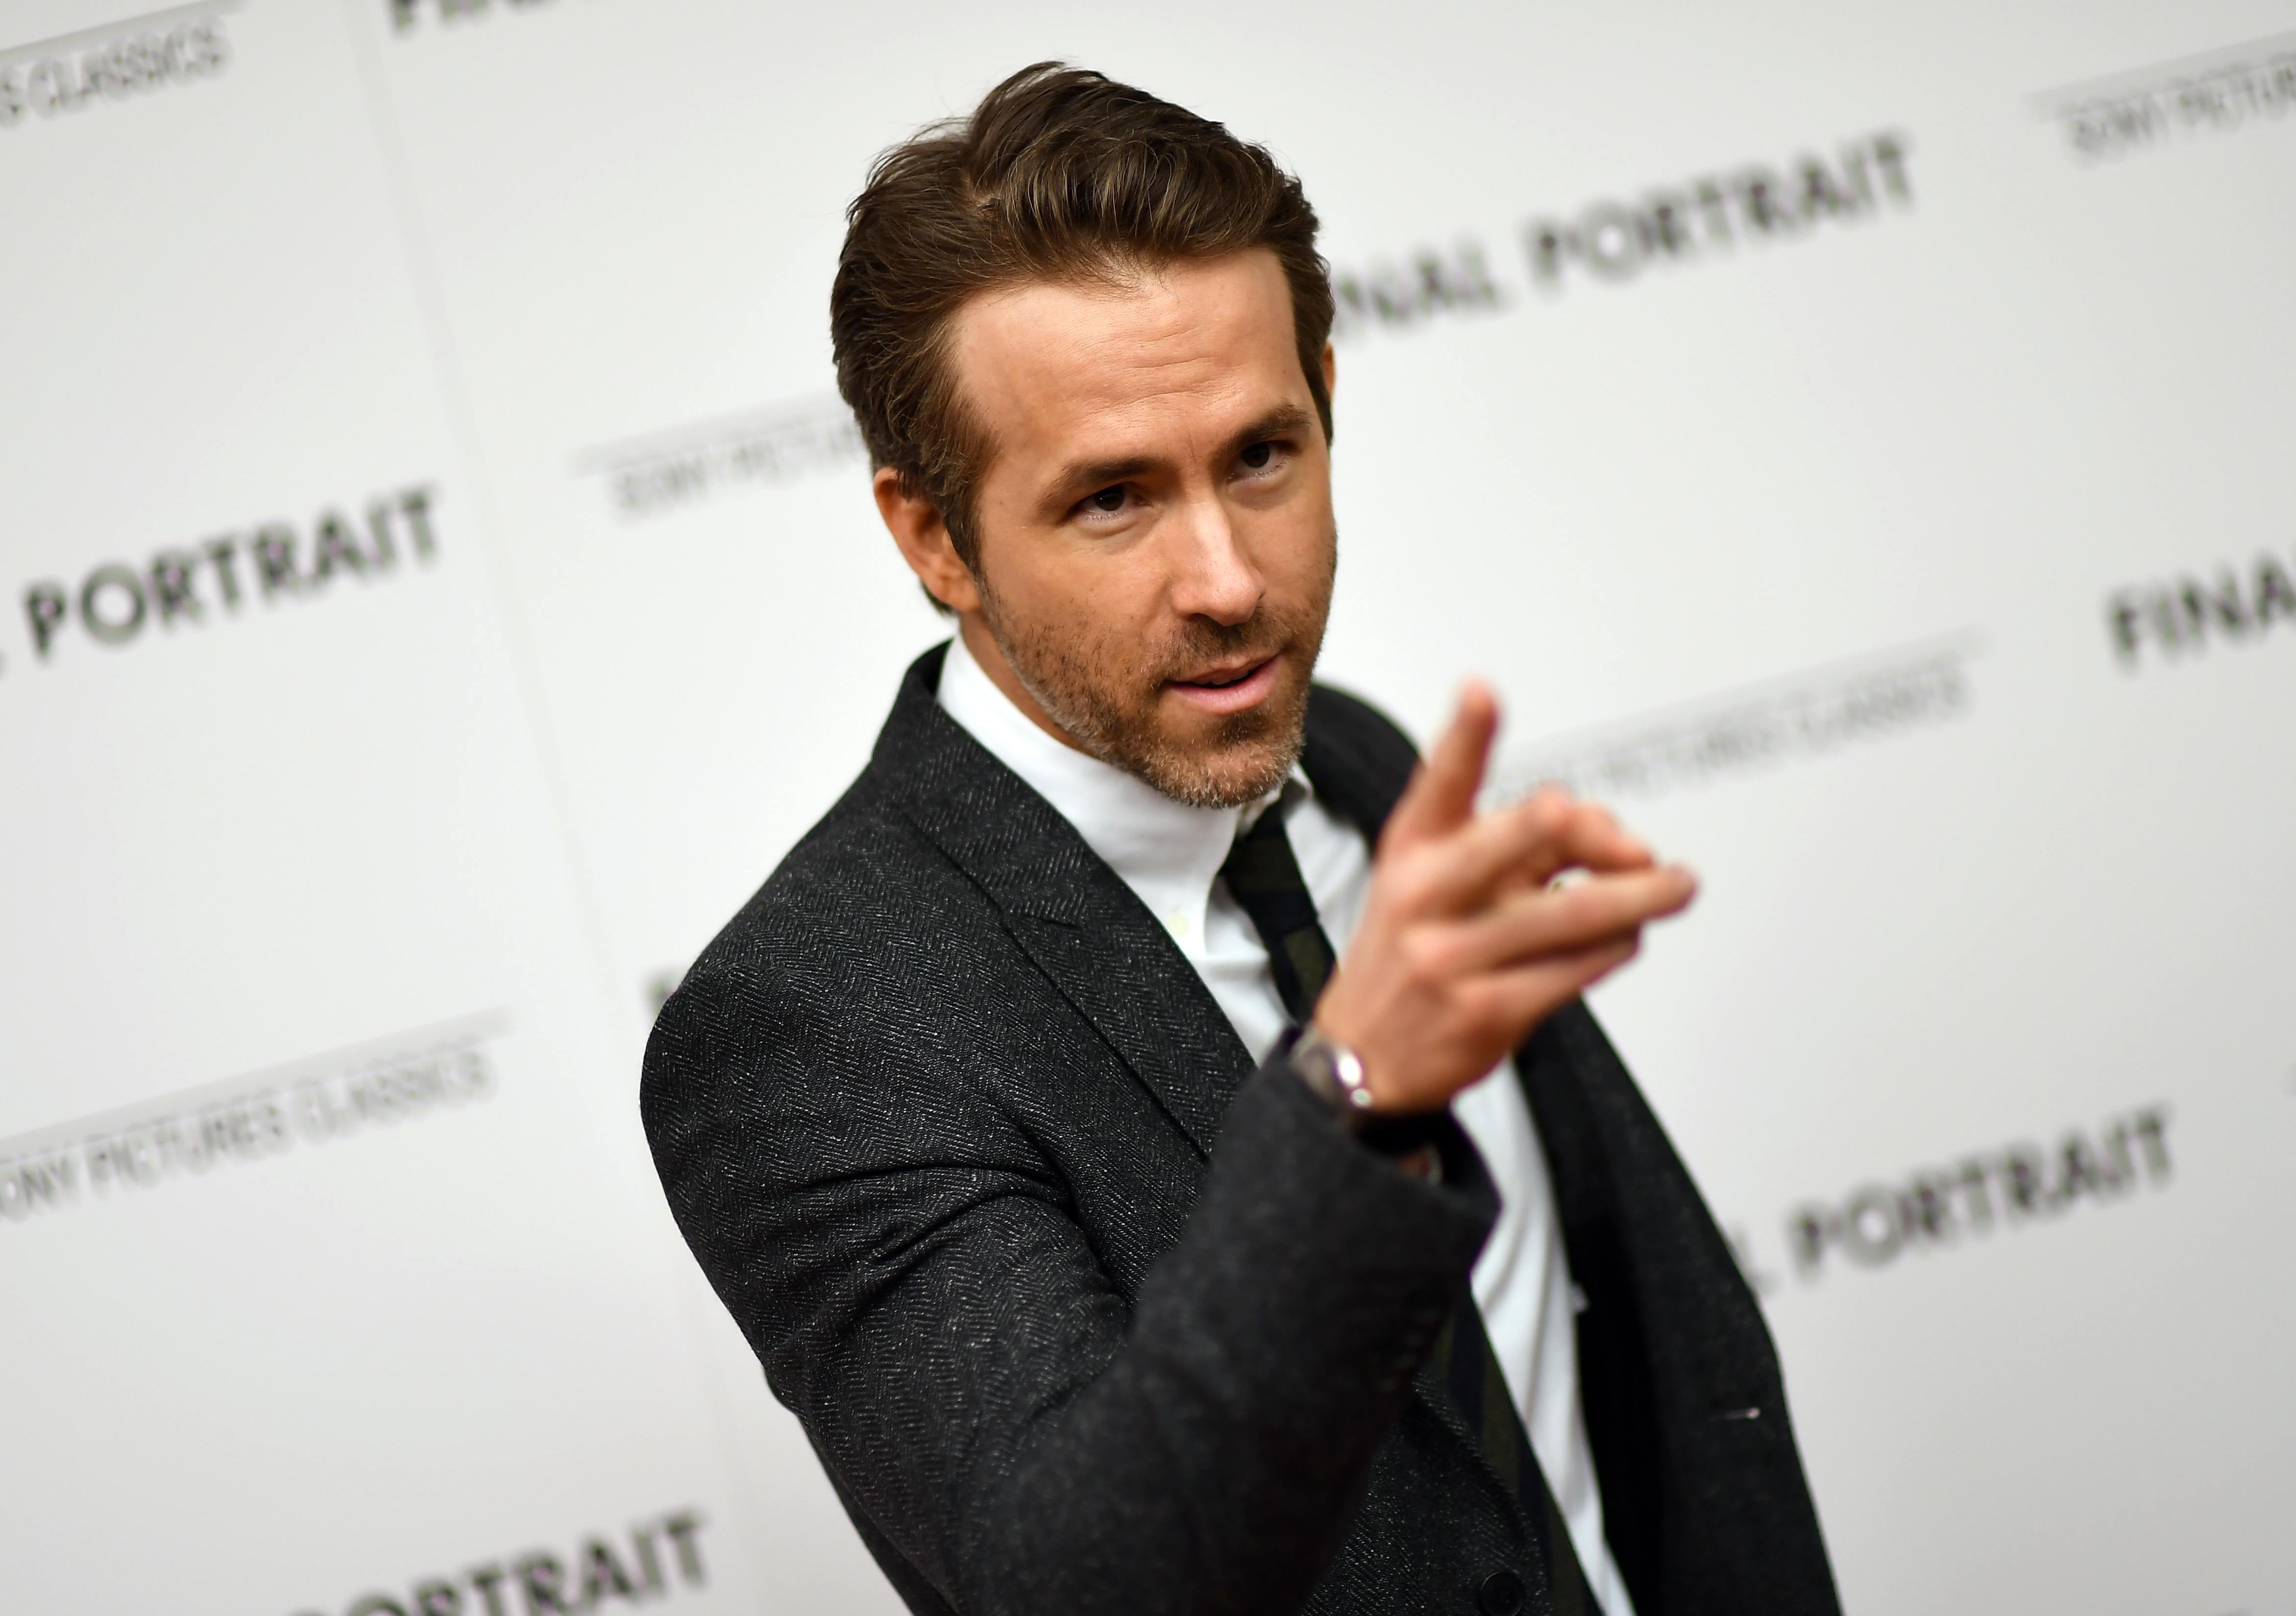 6 Underground' Cast: Who Stars With Ryan Reynolds in the Michael Bay Movie?